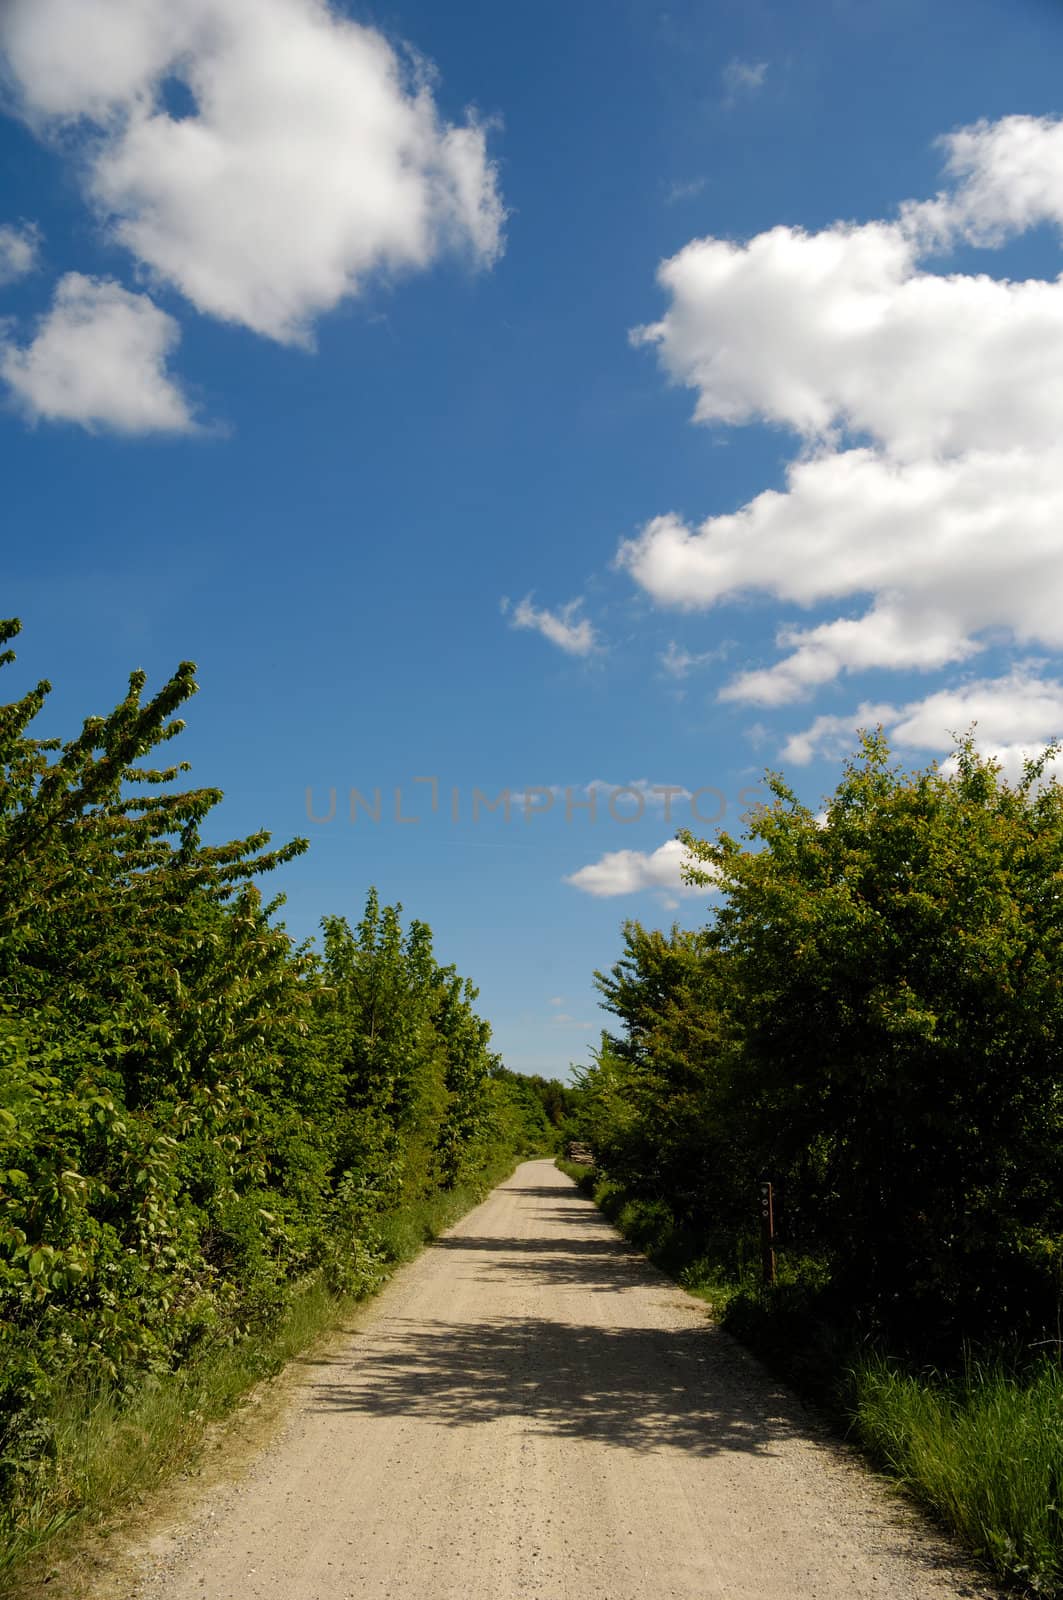 A pathway and nature with blue and cloudy sky